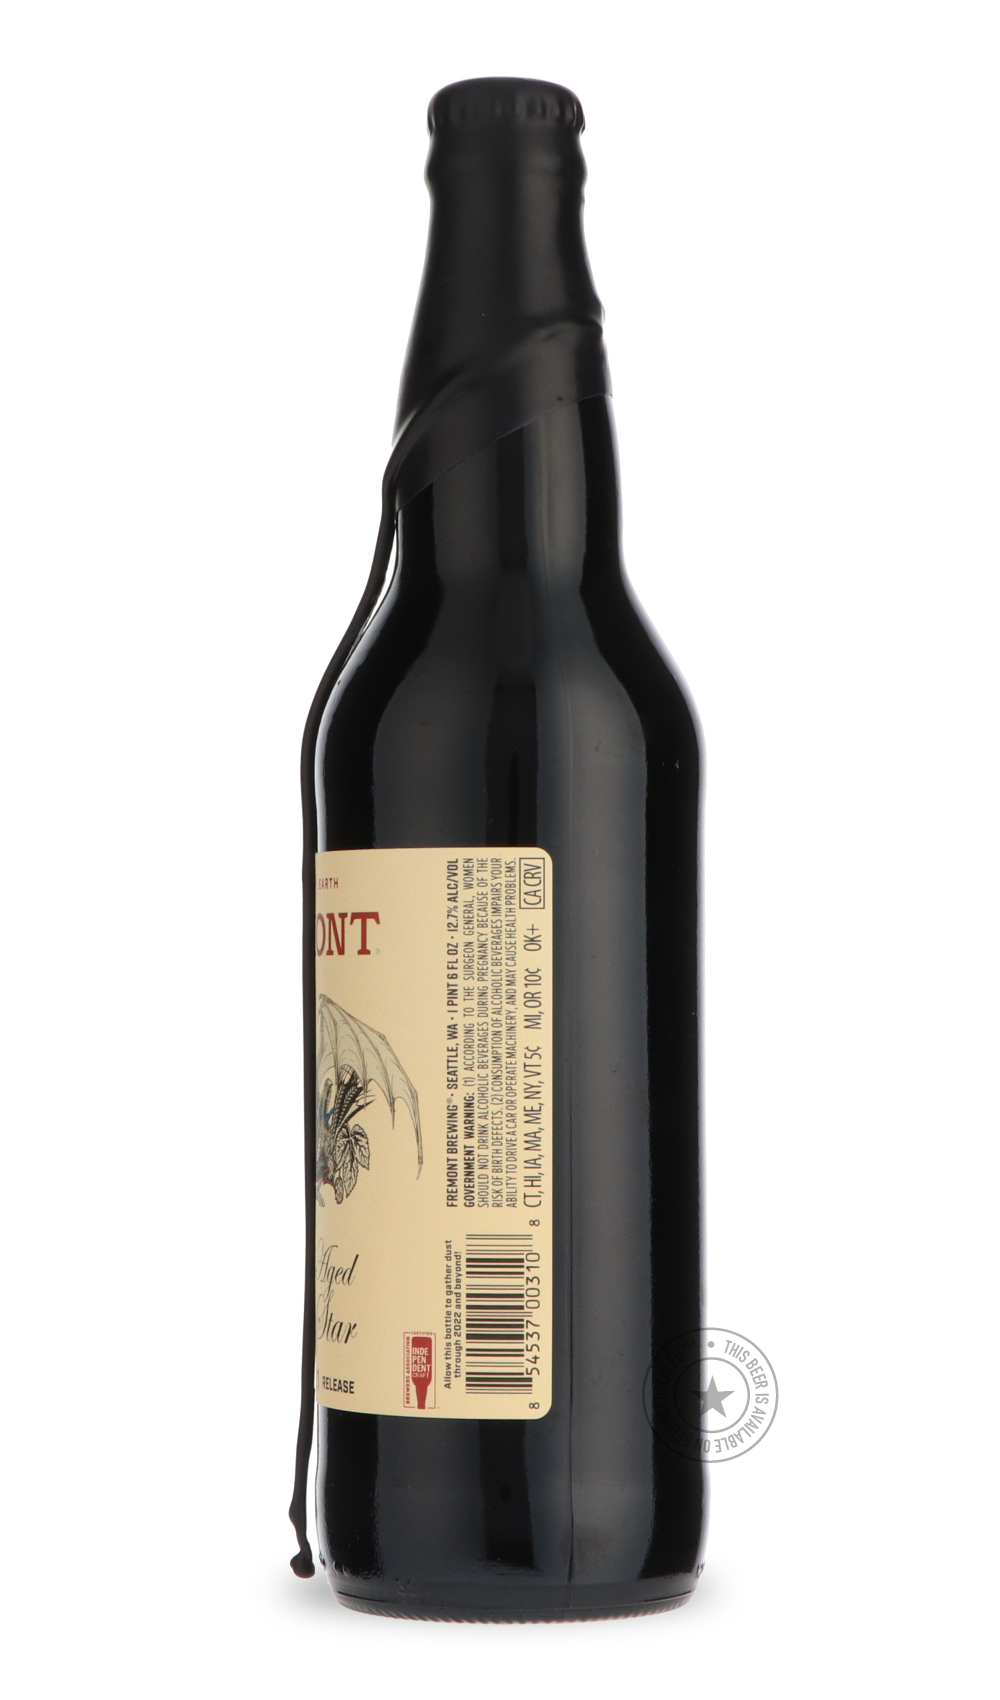 -Fremont- Bourbon Barrel-Aged Dark Star 2021-Stout & Porter- Only @ Beer Republic - The best online beer store for American & Canadian craft beer - Buy beer online from the USA and Canada - Bier online kopen - Amerikaans bier kopen - Craft beer store - Craft beer kopen - Amerikanisch bier kaufen - Bier online kaufen - Acheter biere online - IPA - Stout - Porter - New England IPA - Hazy IPA - Imperial Stout - Barrel Aged - Barrel Aged Imperial Stout - Brown - Dark beer - Blond - Blonde - Pilsner - Lager - Wh